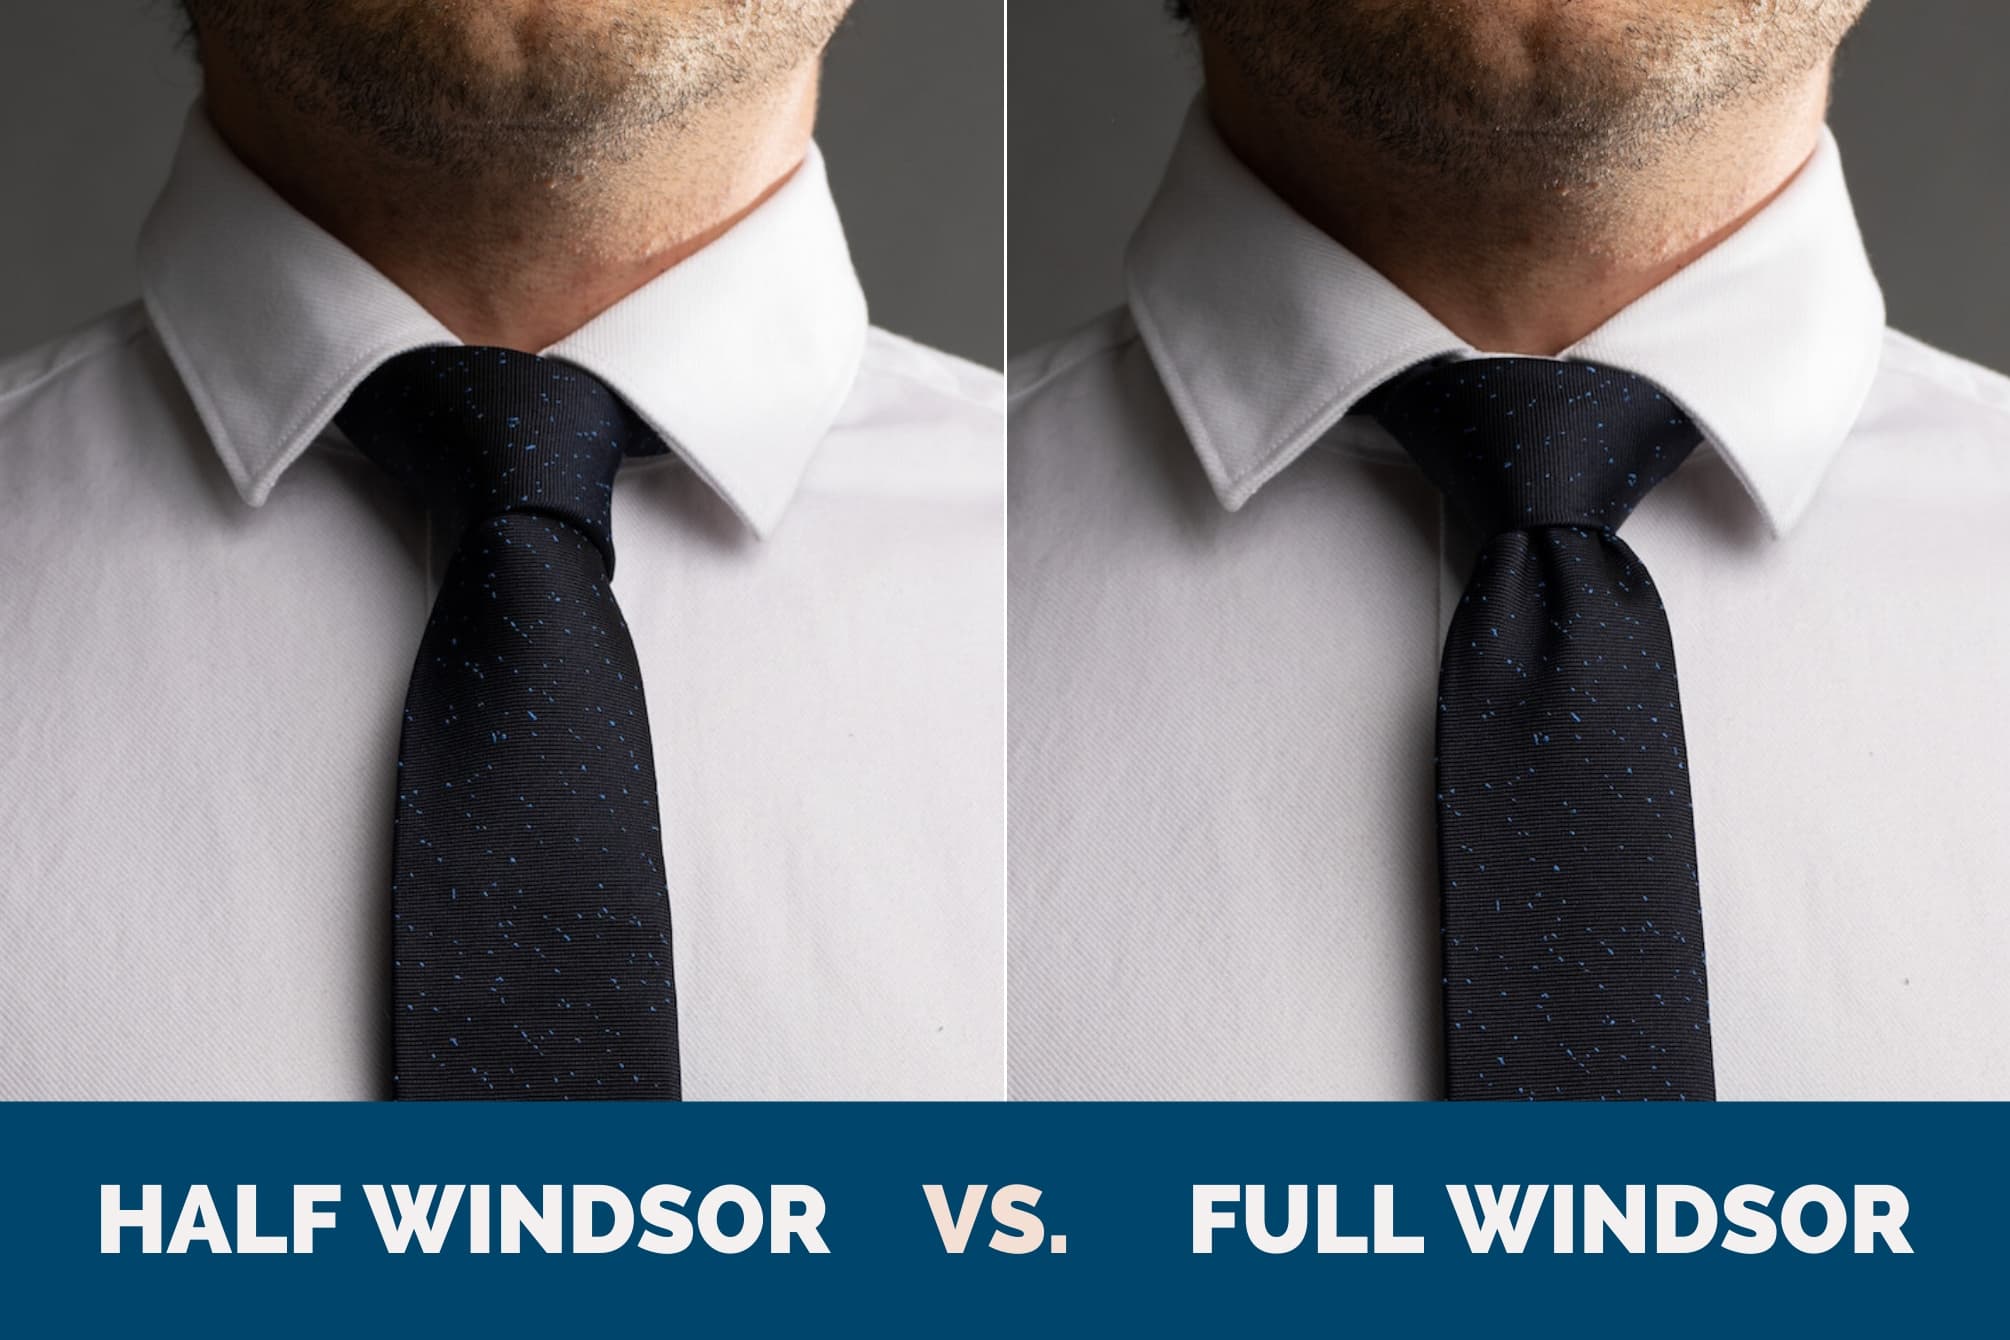 How to Tie A Perfect Windsor Knot 